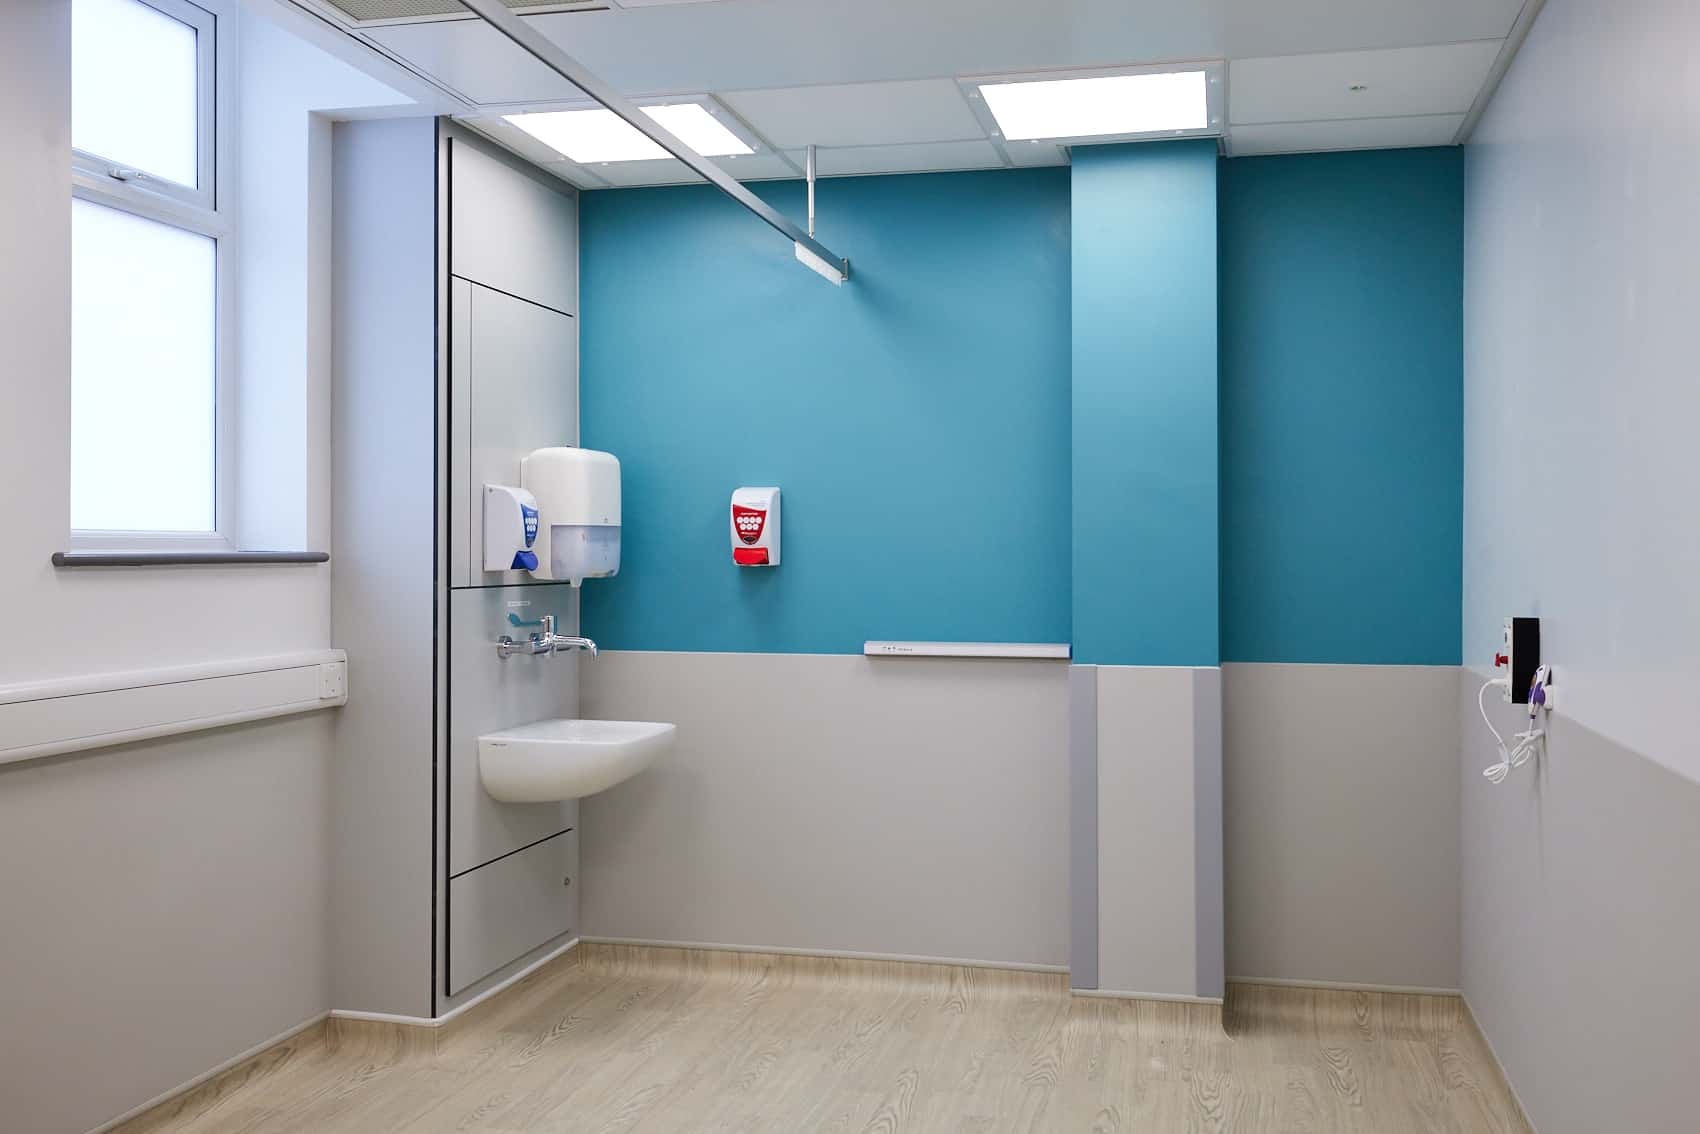 Image above: Completion of the Community Diagnostic Centre in Mexborough on behalf of Doncaster and Bassetlaw Teaching Hospitals NHS Foundation Trust at Montagu Hospital.